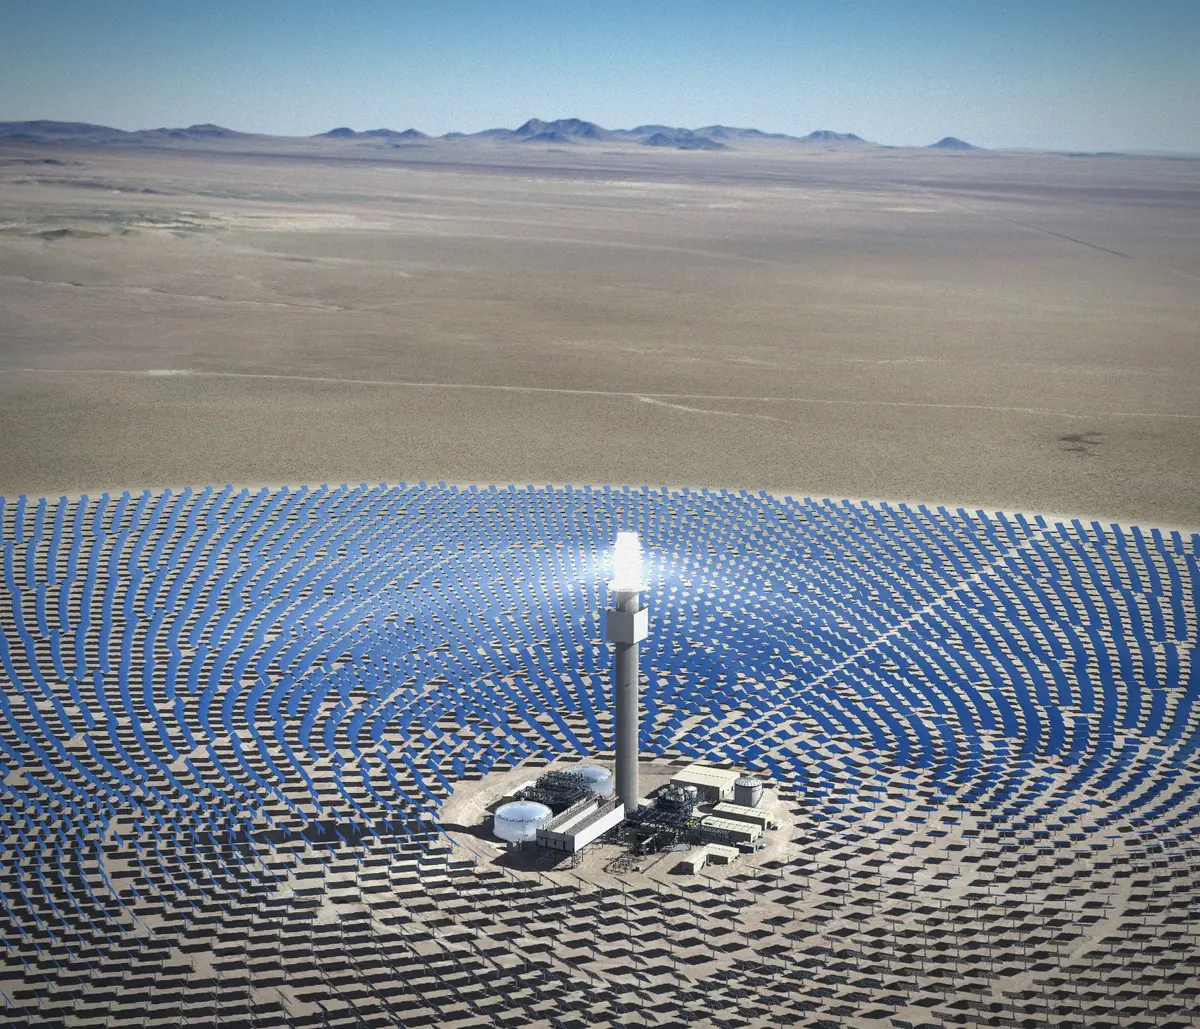 A vast valley filled with thousands of photovoltaic panels arranged in a large circle.